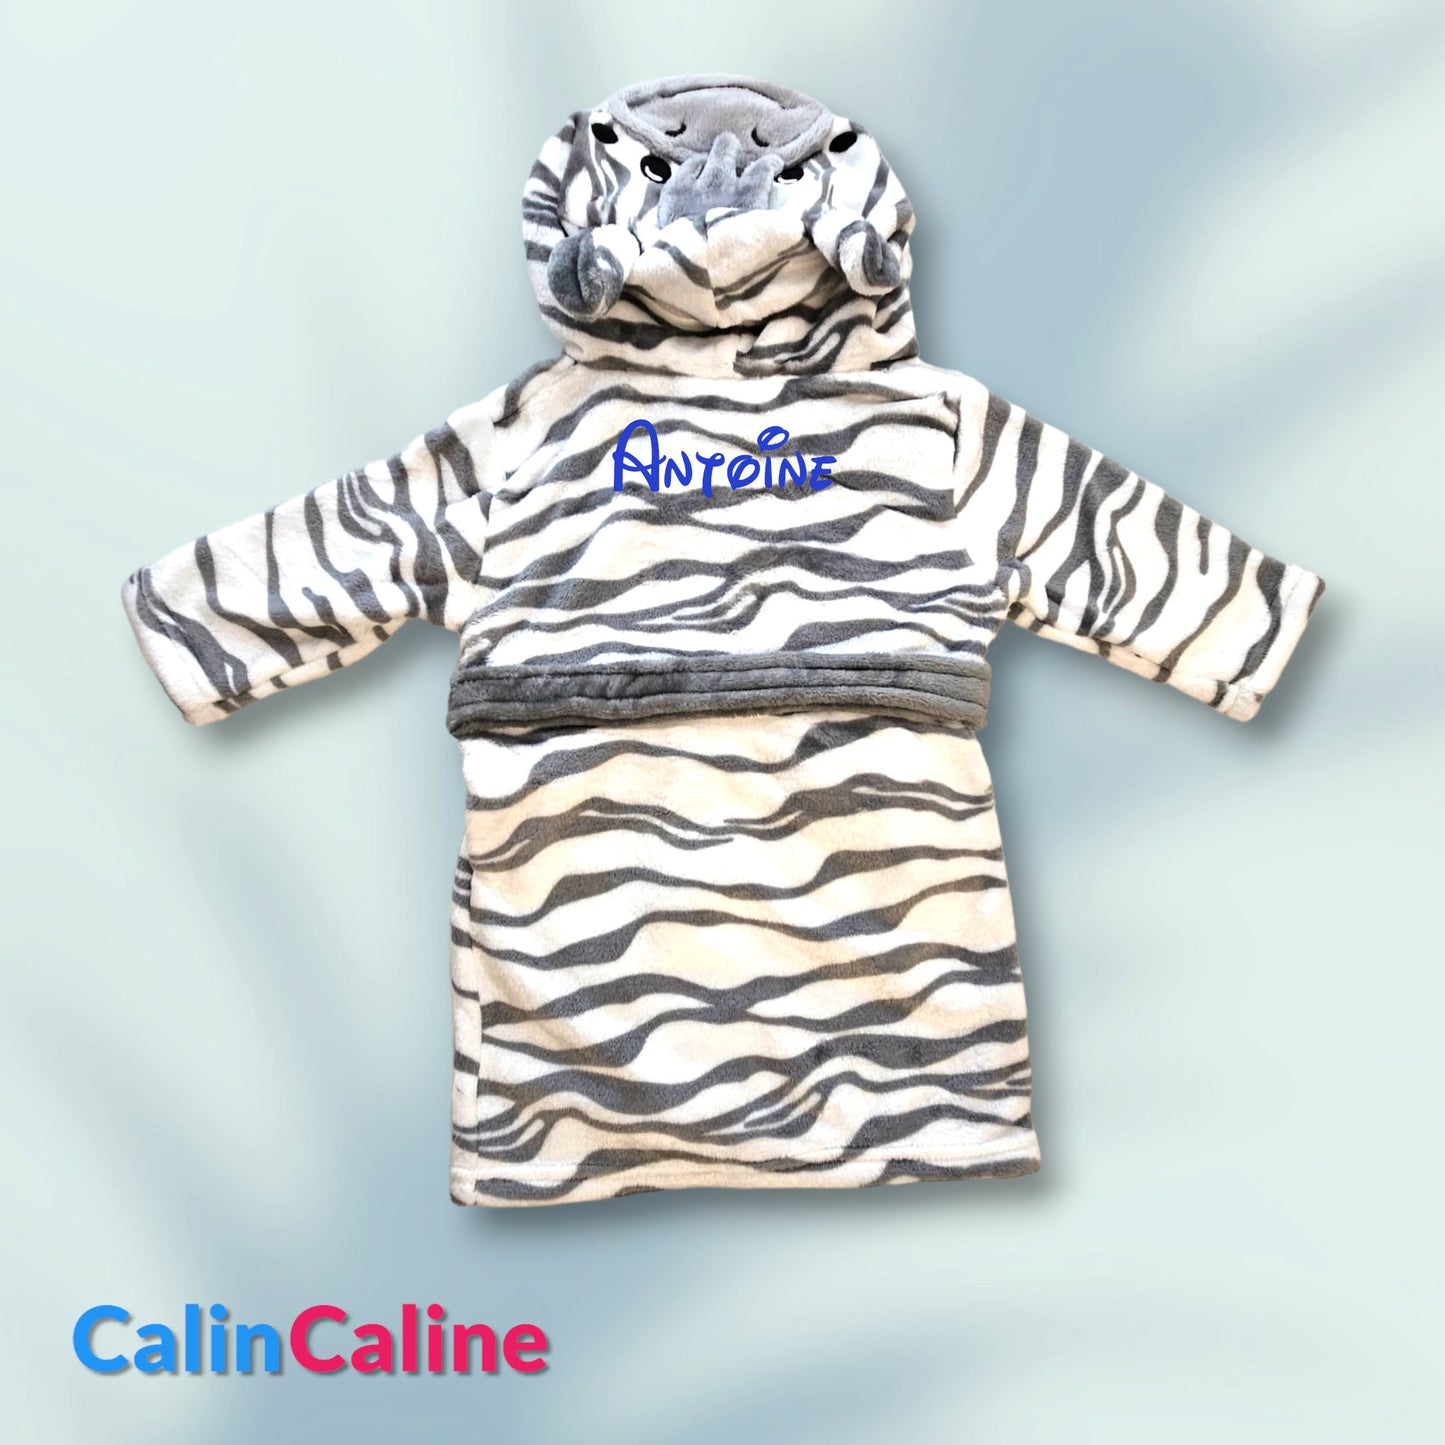 Children's Zebra bathrobe | Gray and White | Personalized with first name | 3 sizes